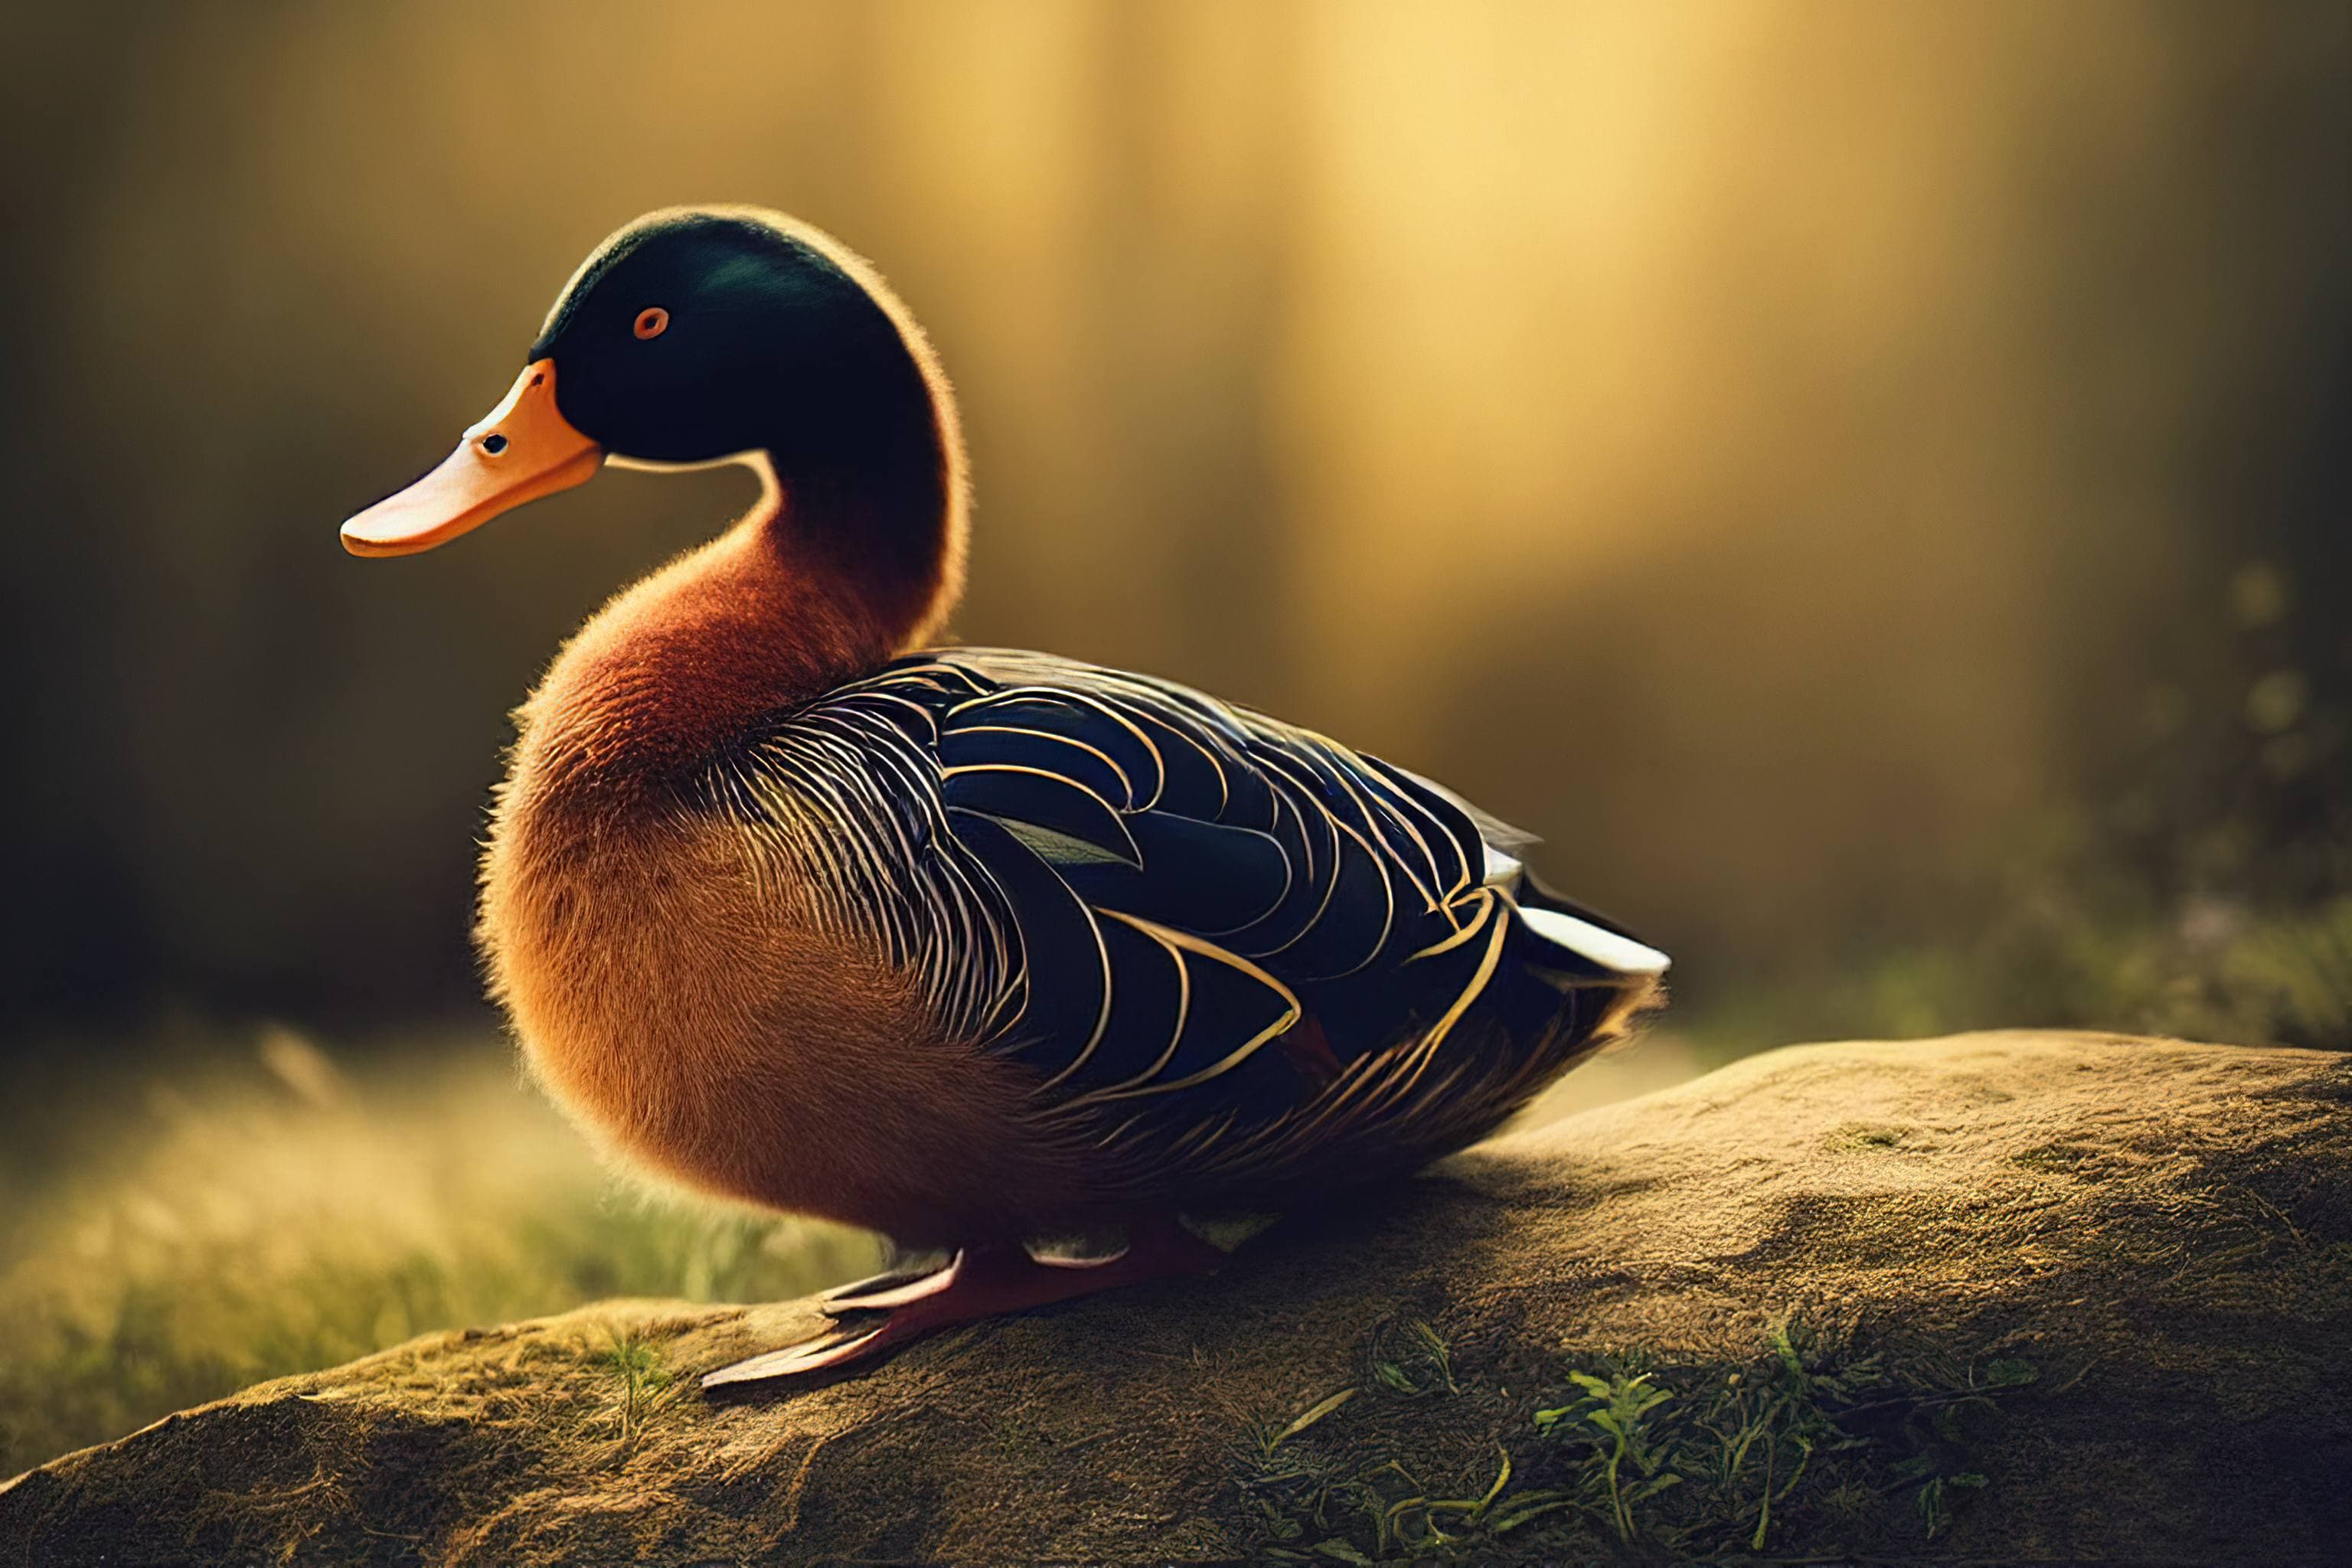 A colorful duck on a rock